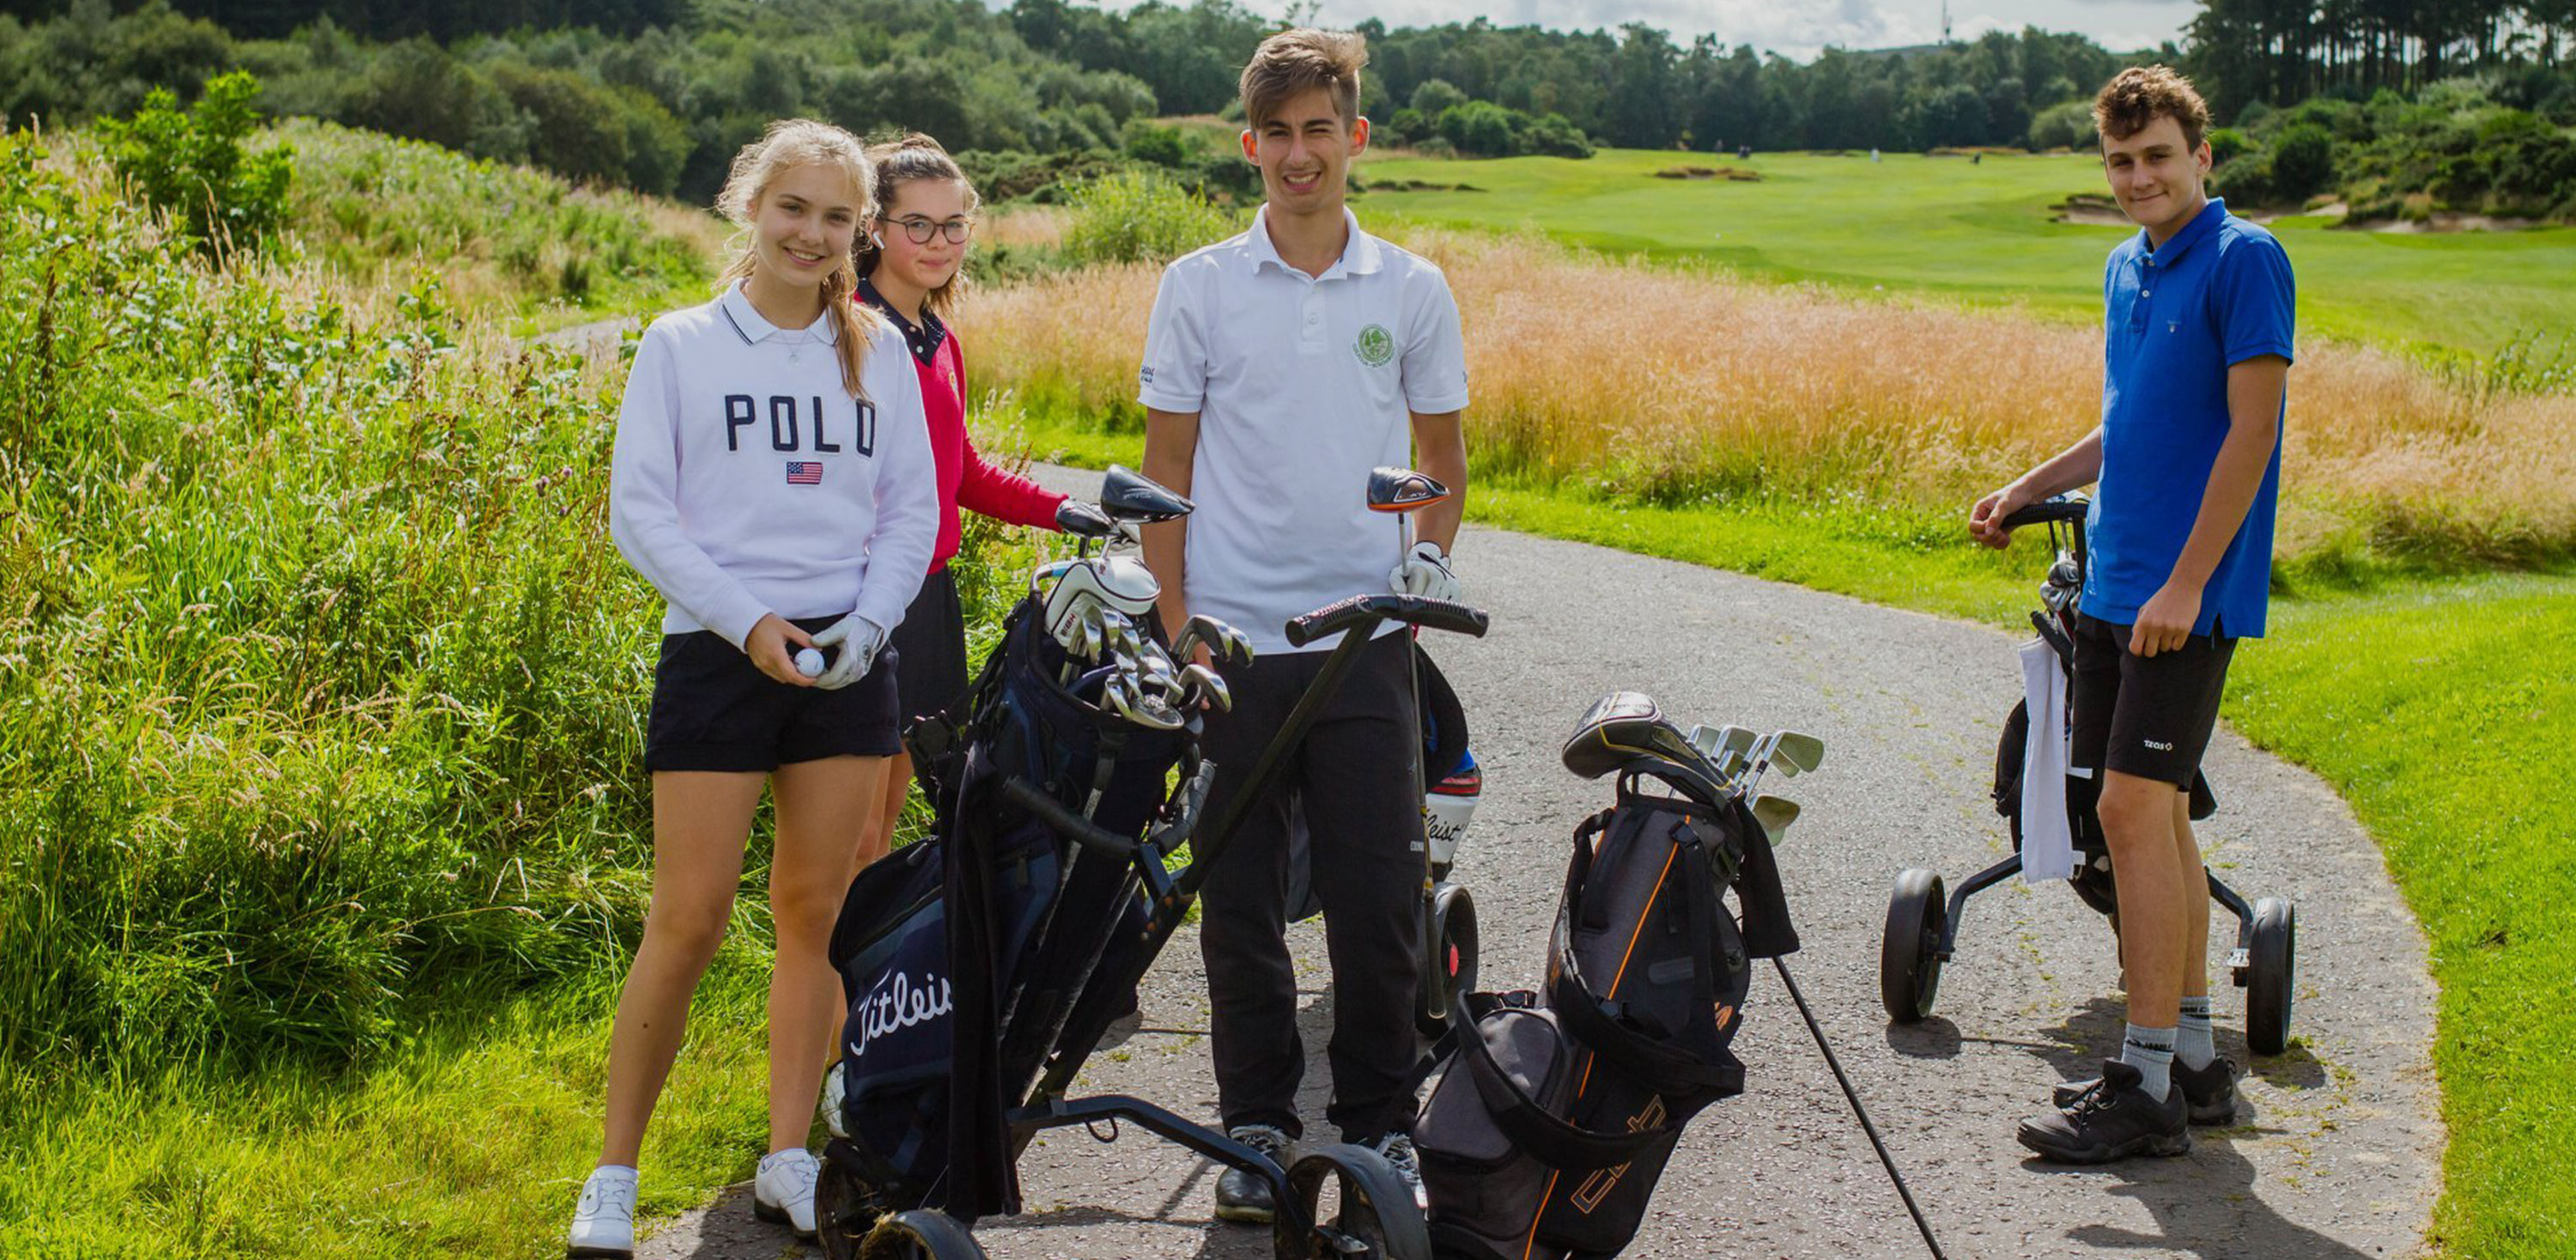 students on a golf course elective